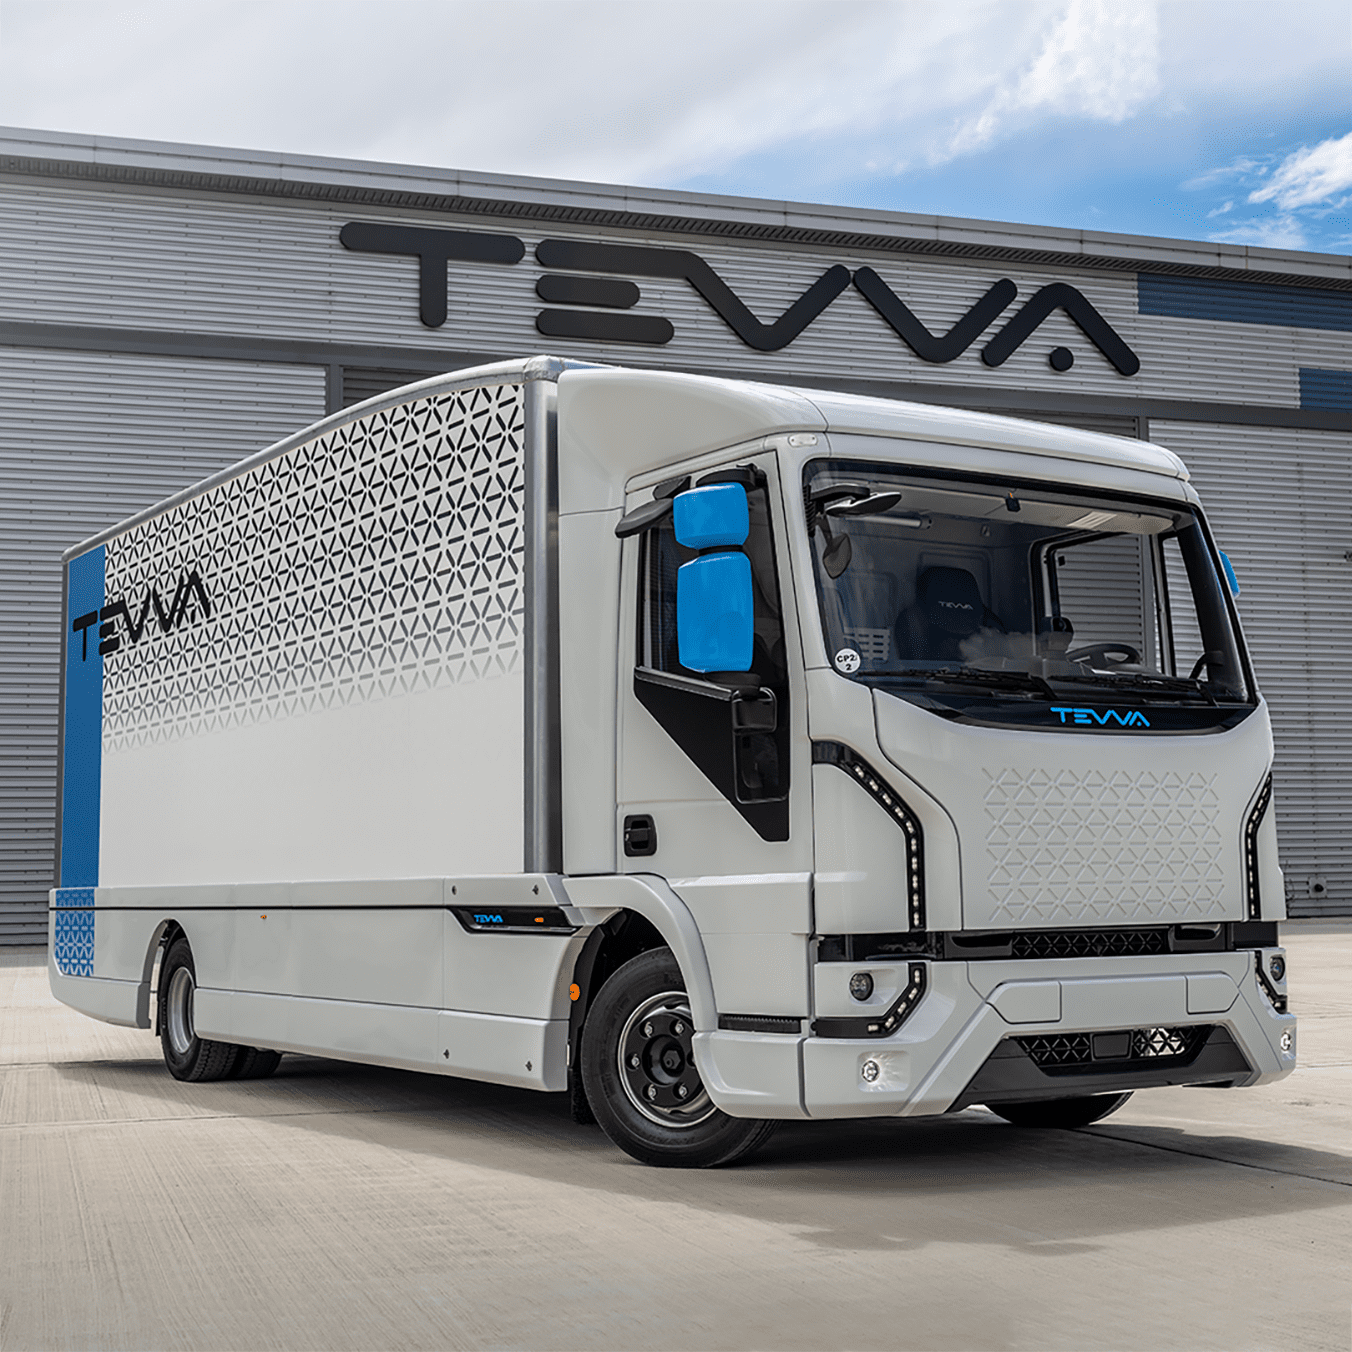 Tevva’s new 7.5T electric truck. Image used courtesy of Tevva